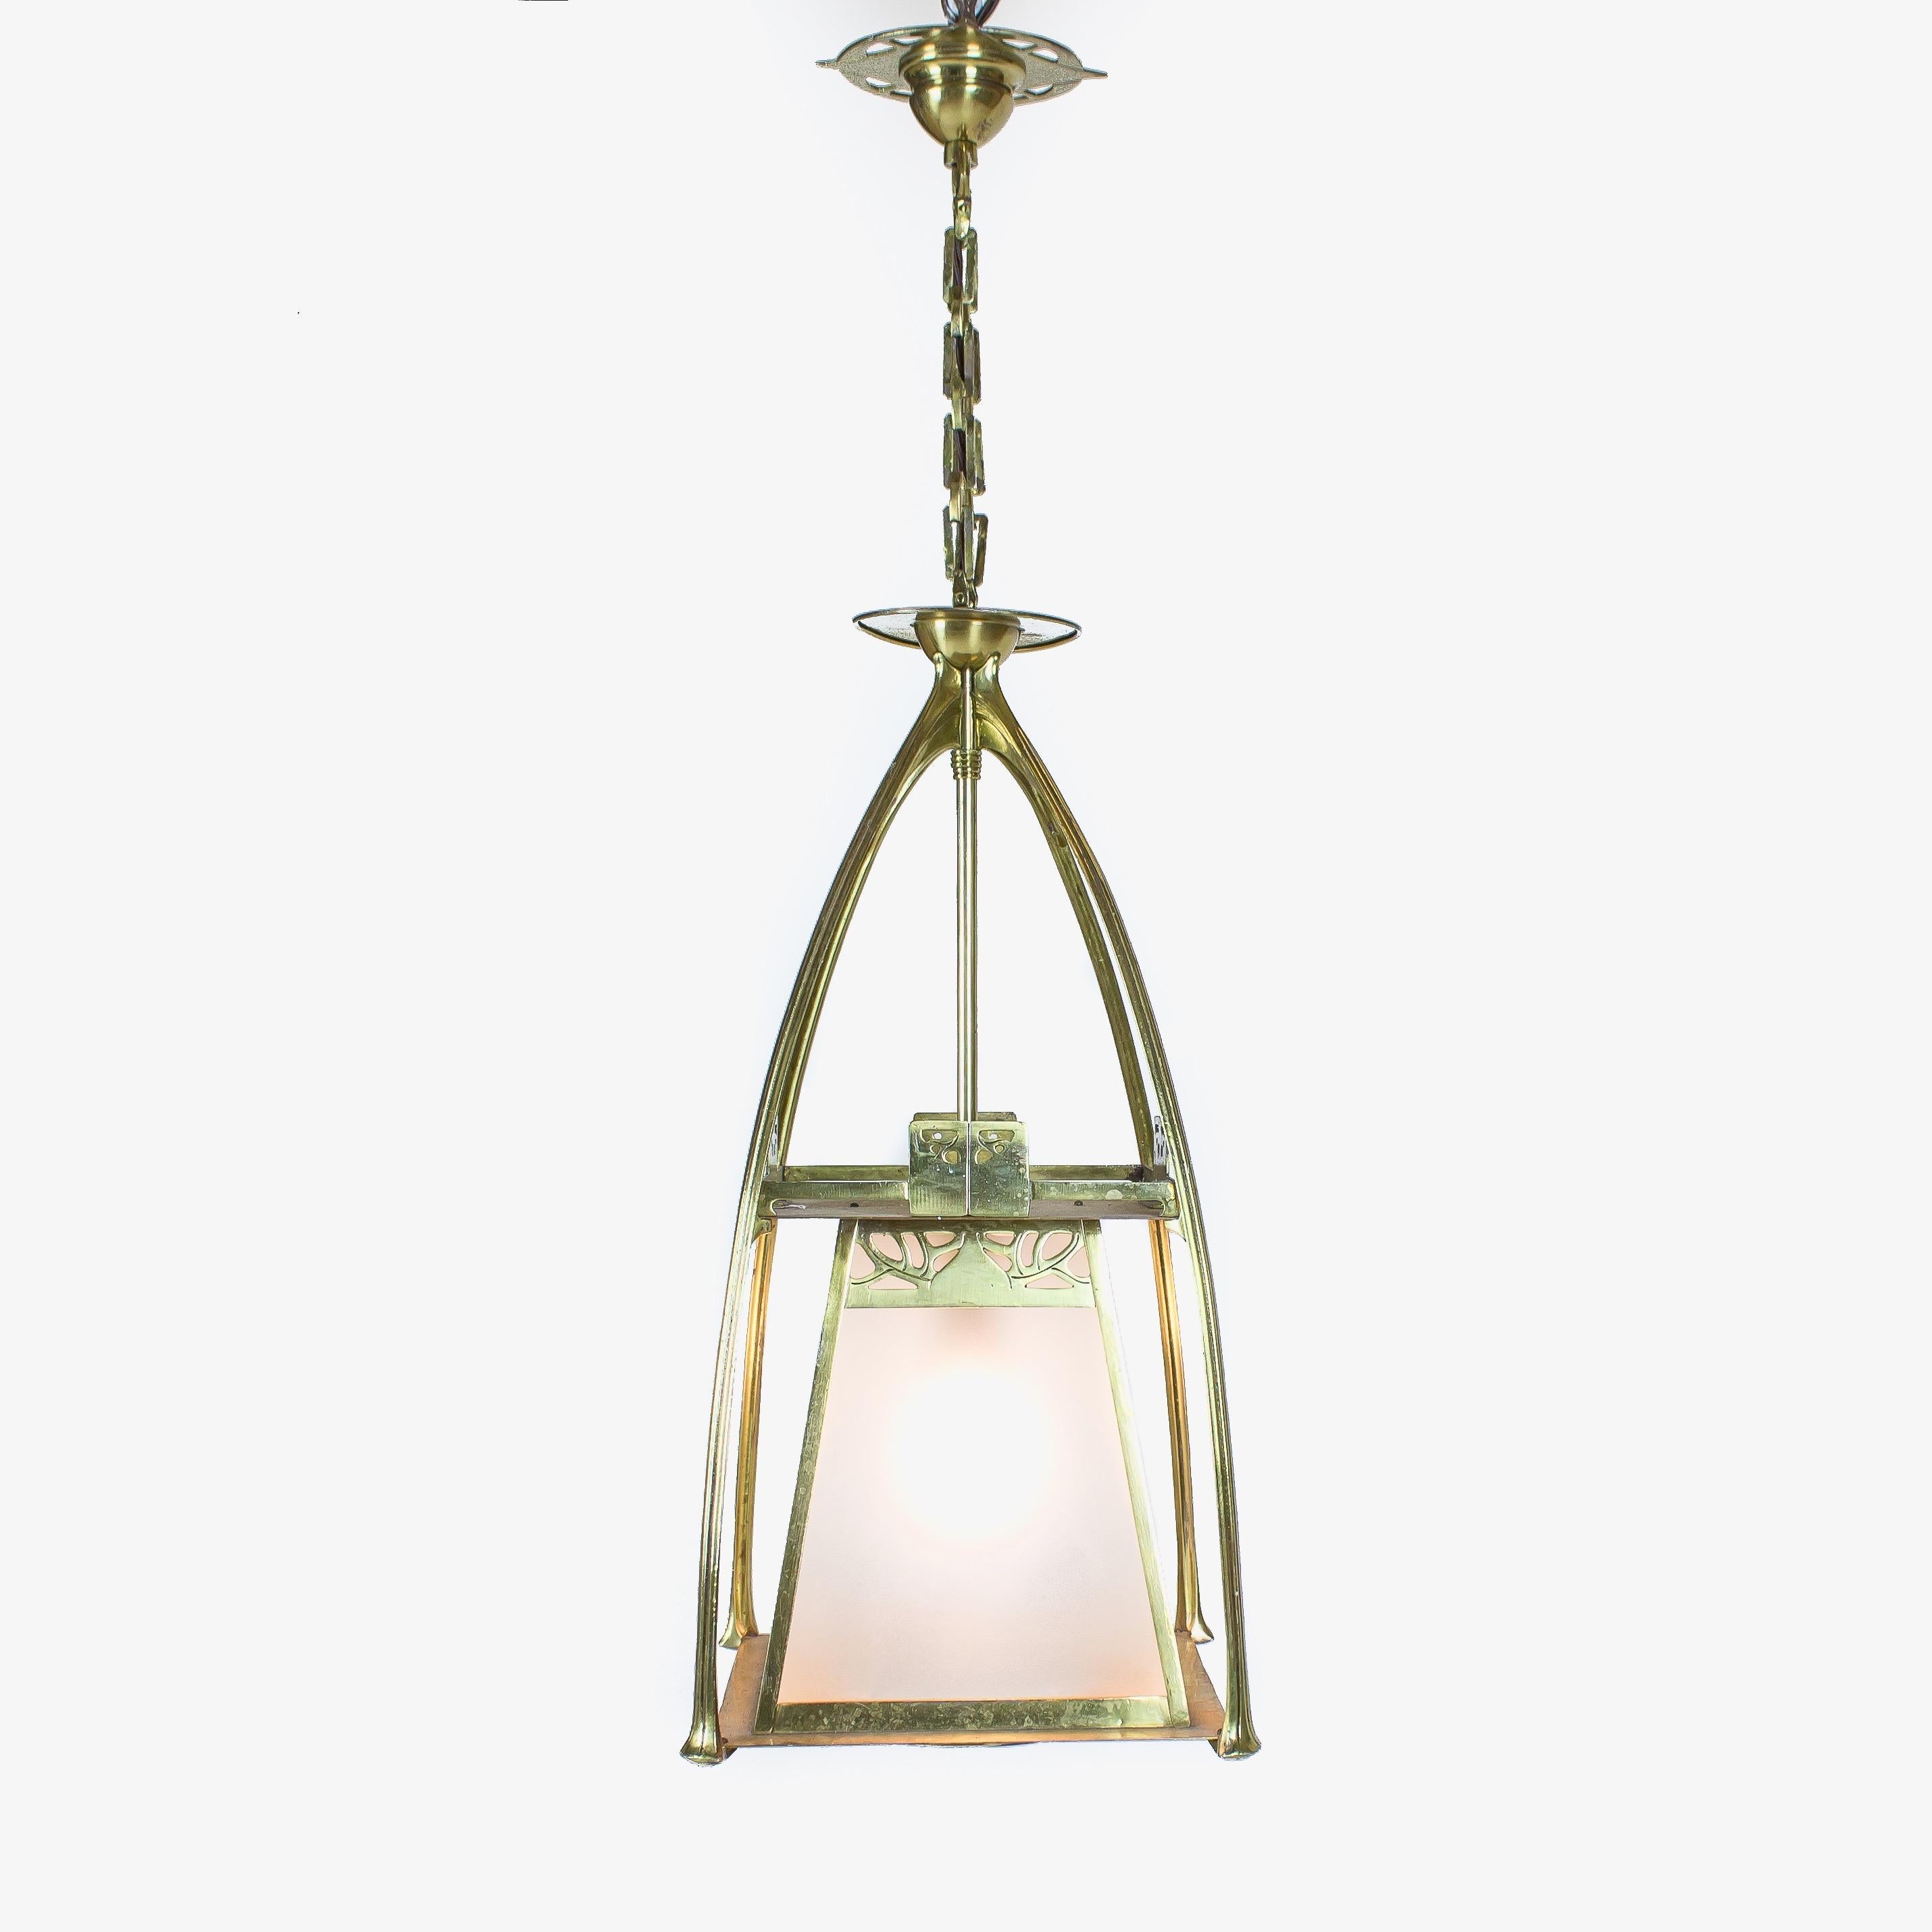 The splayed square section glazed body suspended in four arched uprights.

Probably Belgium, circa 1870s

Height including chain and ceiling rose is 91cm.